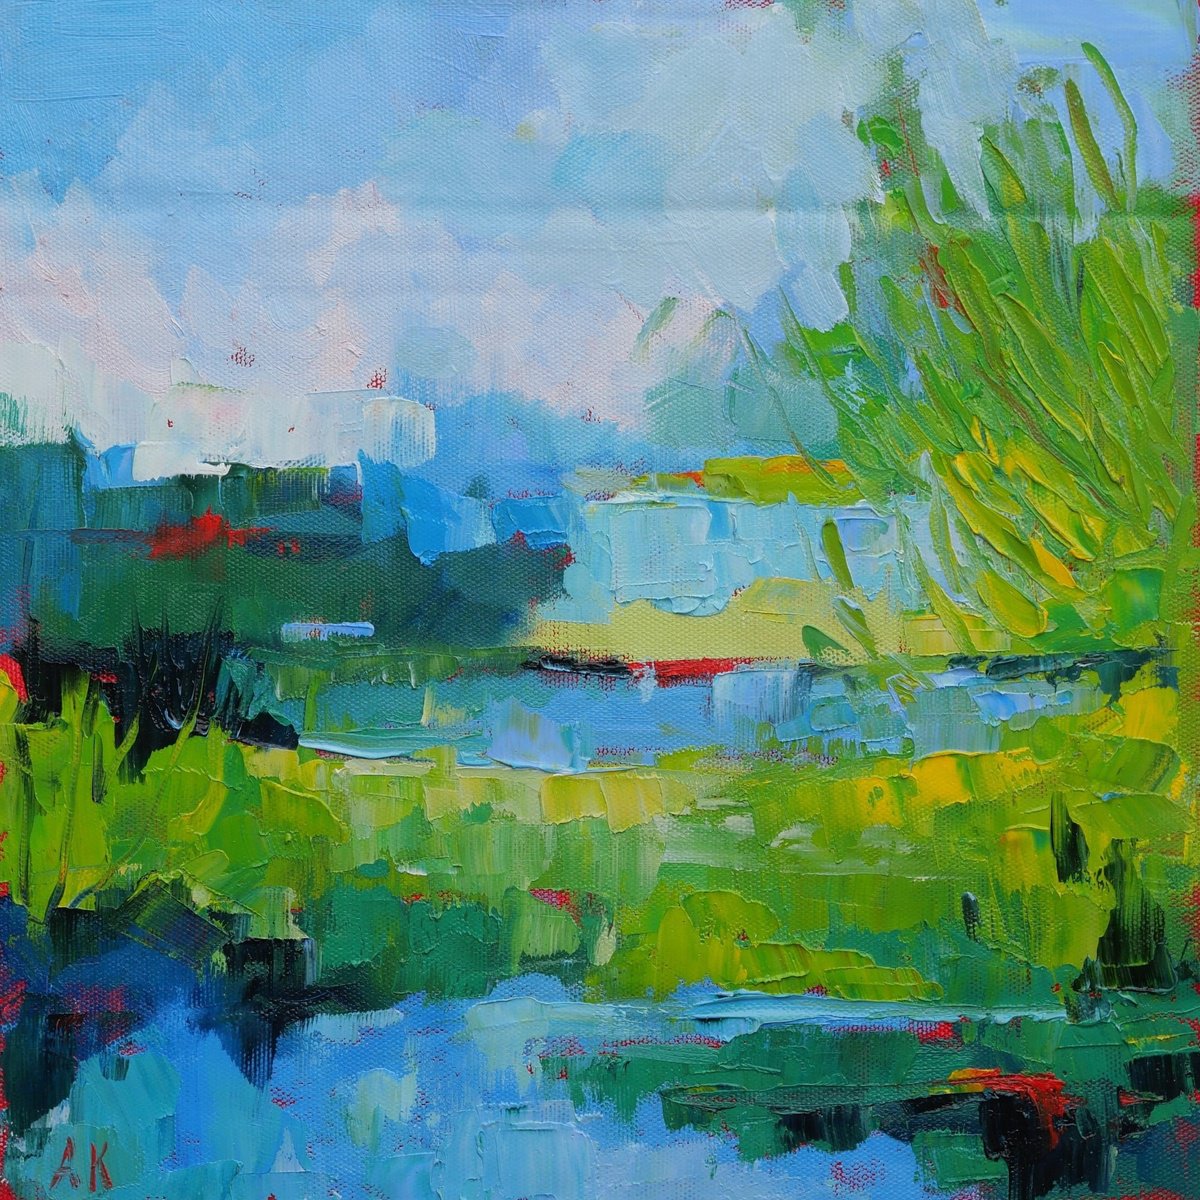 Water meadow - textured semi abstract landscape oil painting by Alfia Koral